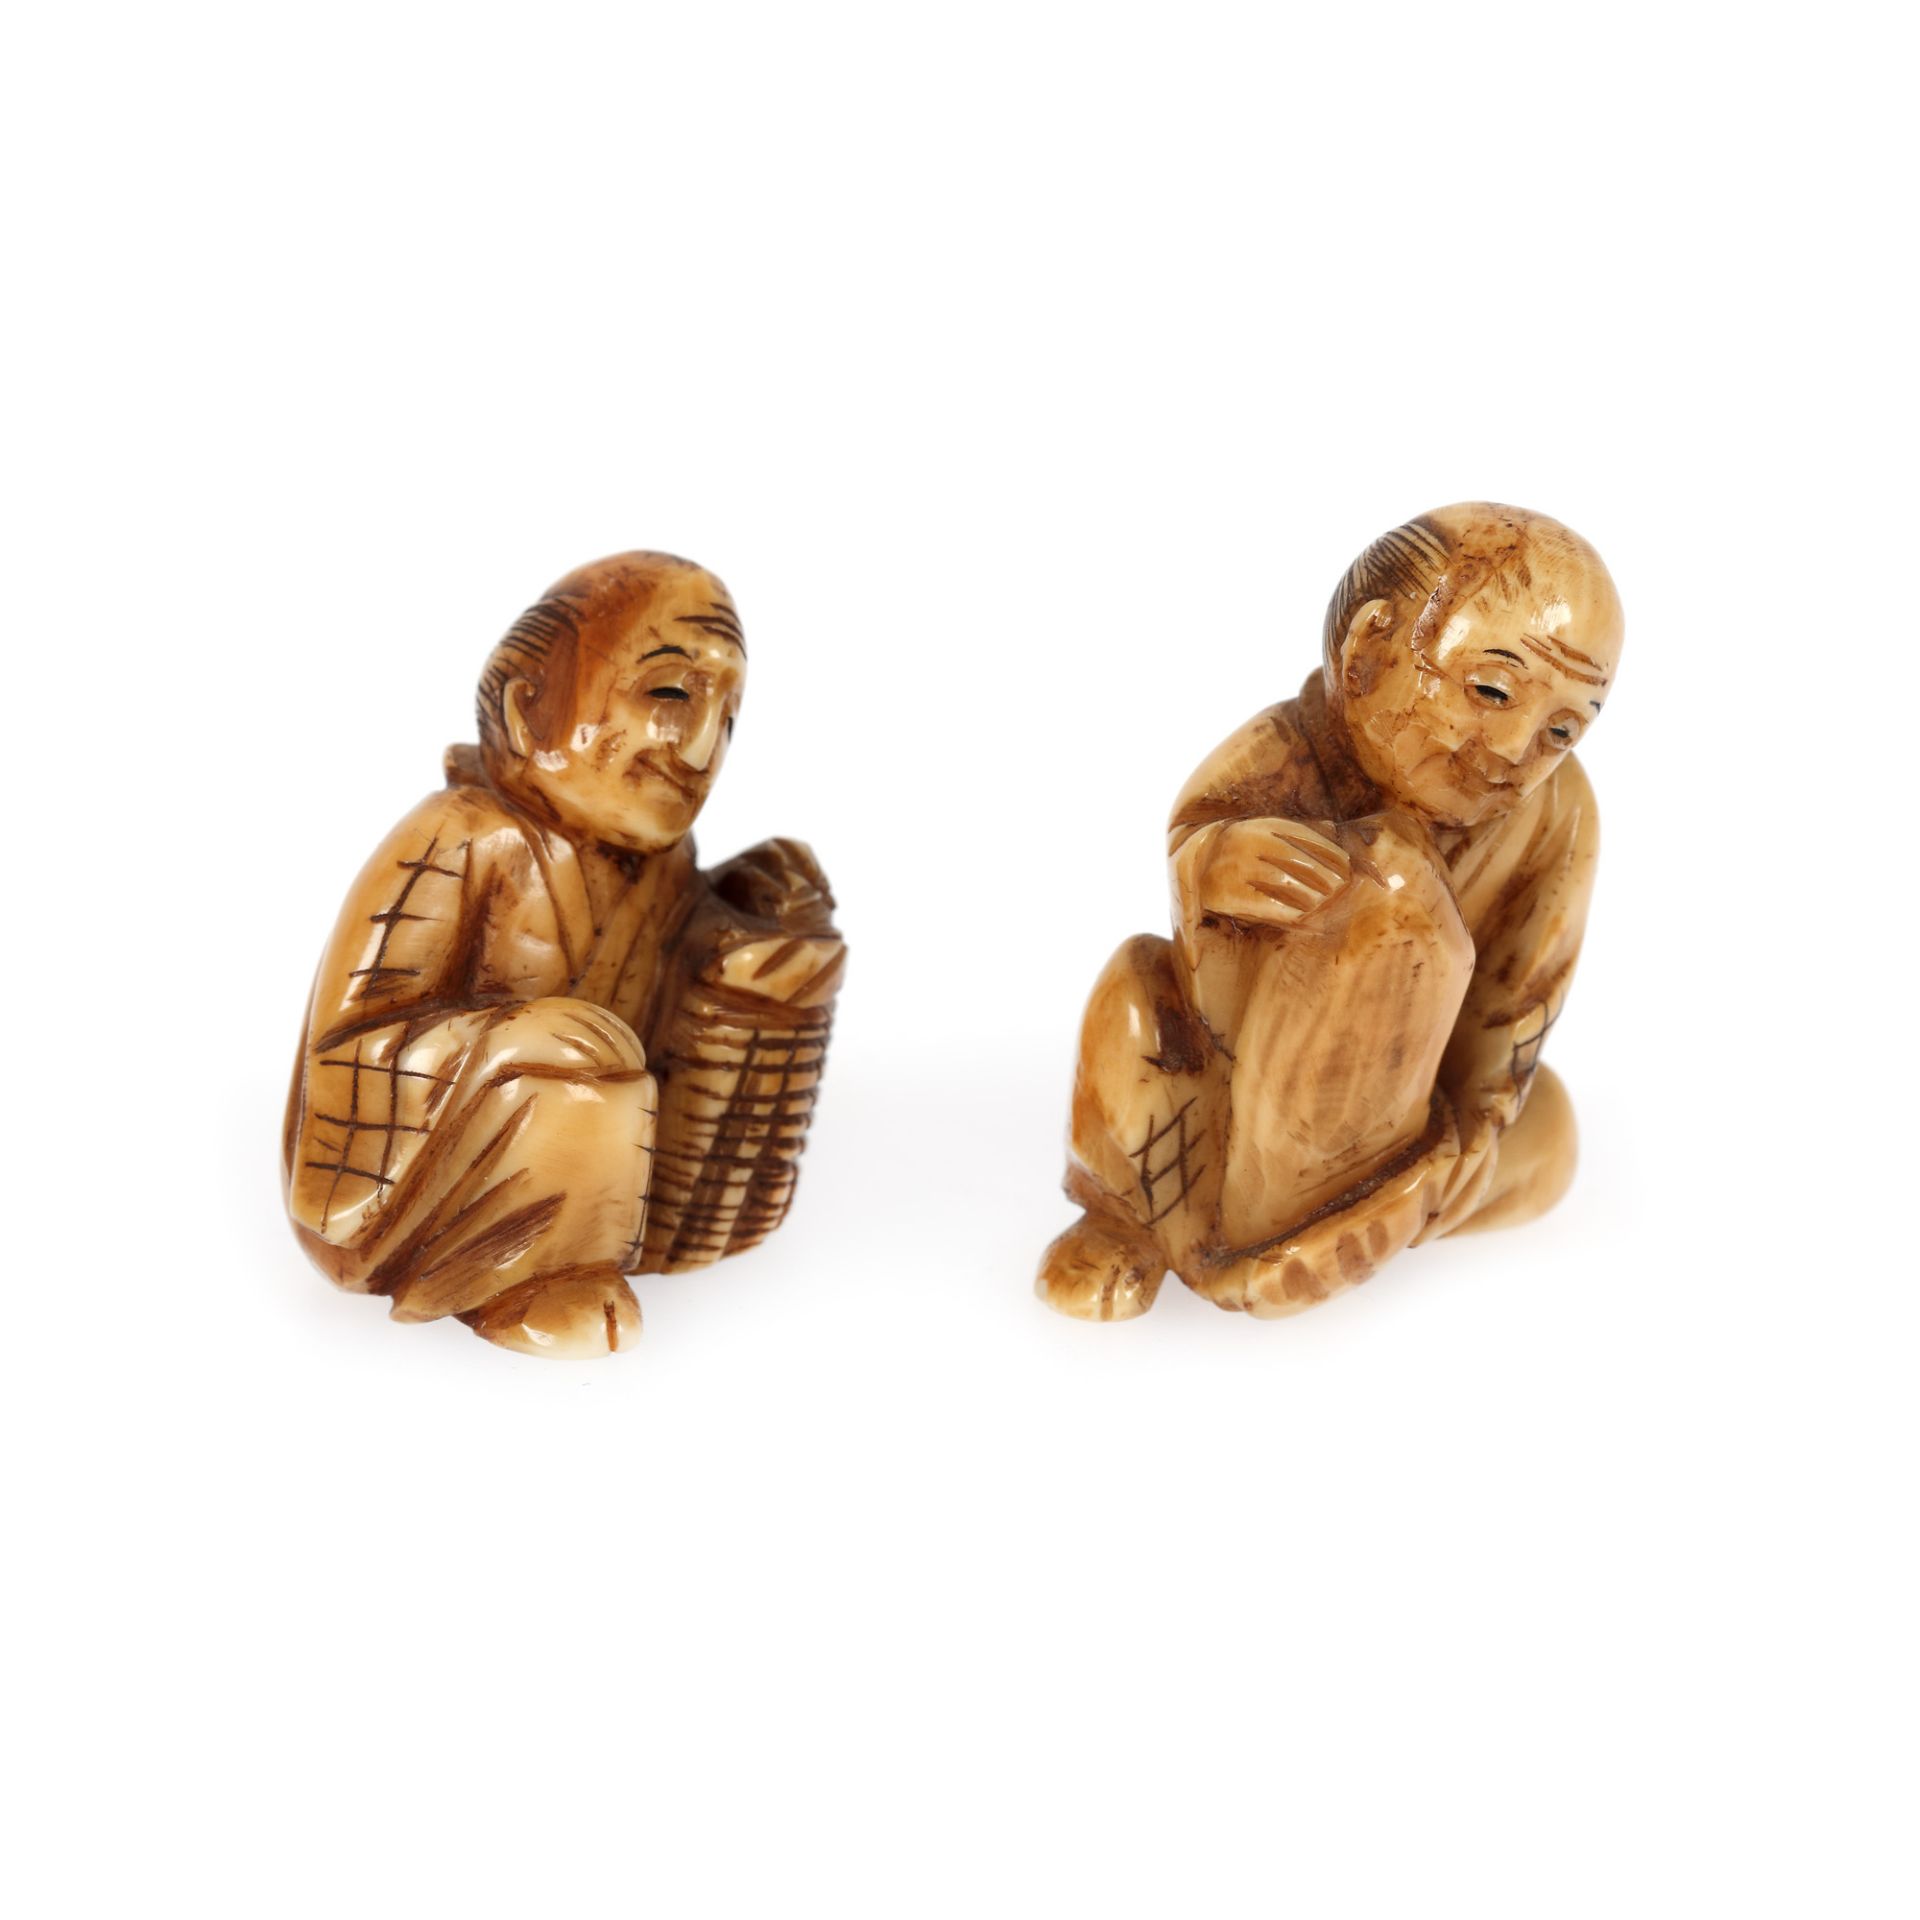 Pair of ivory netsuke, depicting two tormented men, Japan, late 19th century - Image 2 of 4